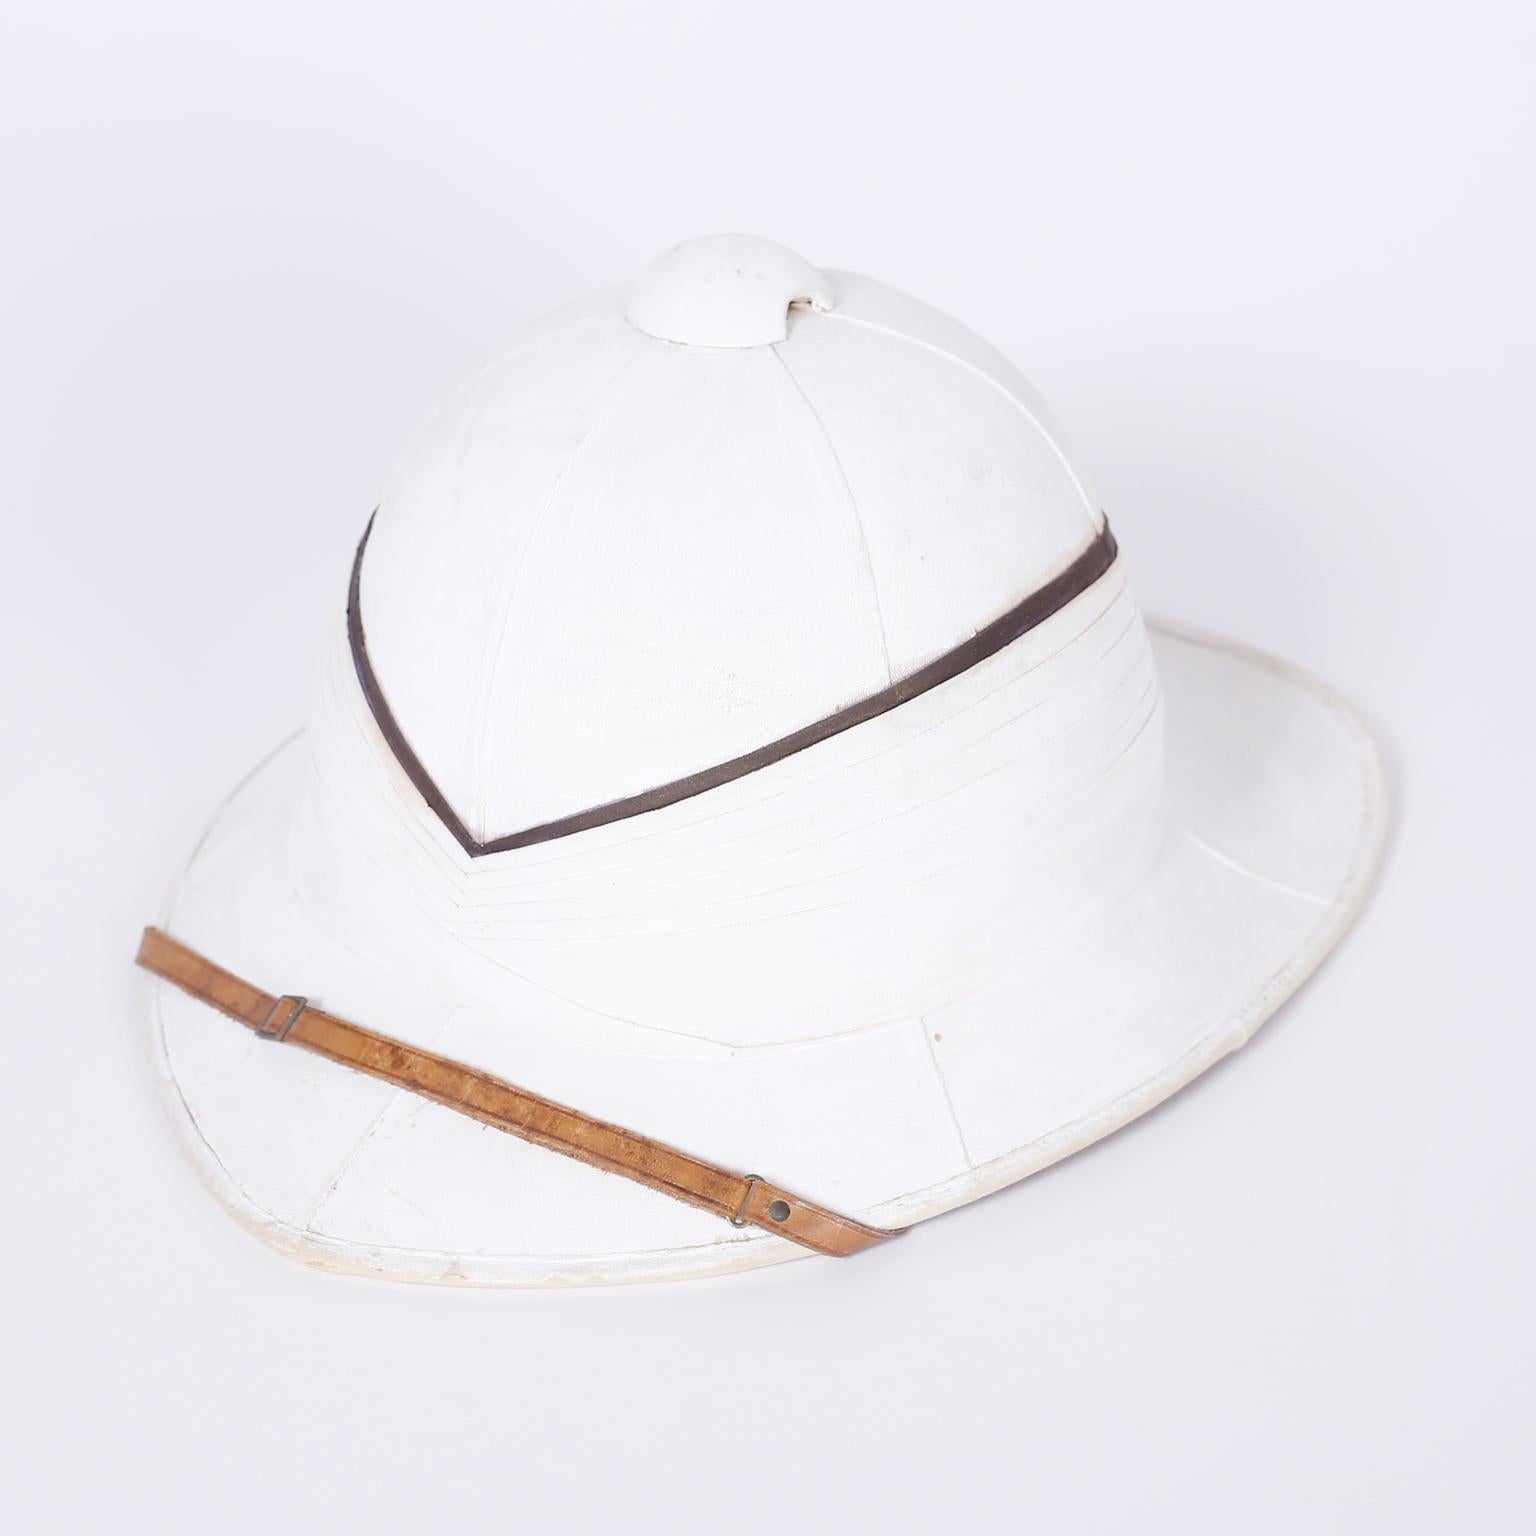 English pith helmet and painted copper box with all the historical romance you could wish for. Originally purchased from Gieves and Hawkes London by F.C.L. Halliday, a decorated Royal Navy officer in WWI.

Metal case measures: H 14, W 16, D